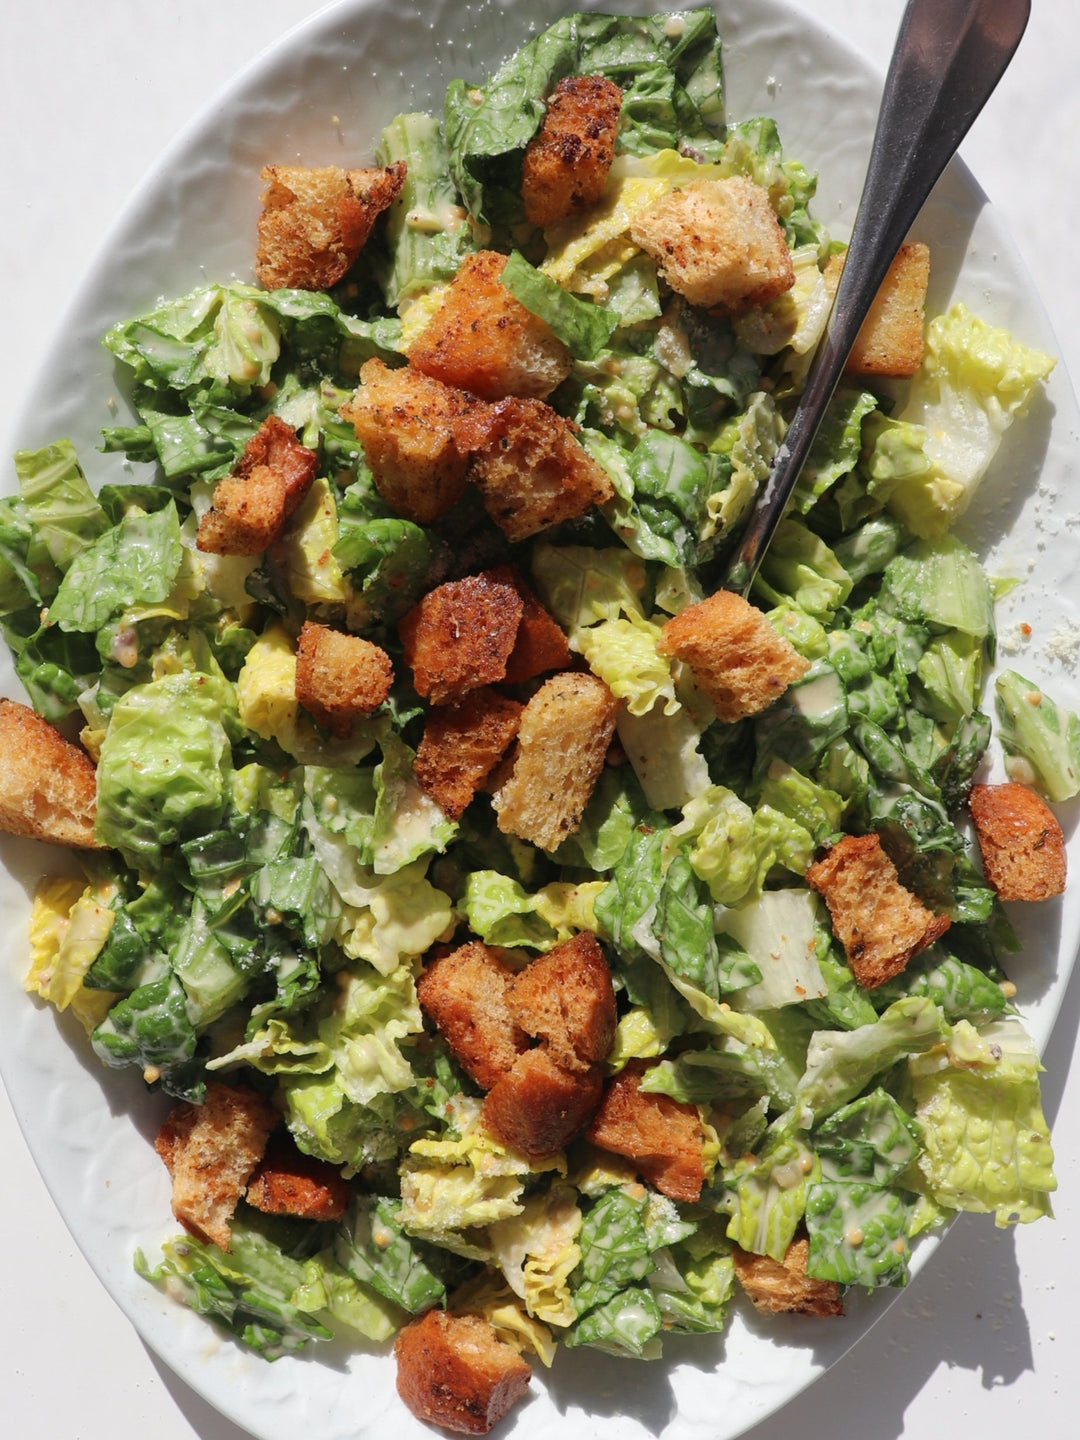 An upclose image of a salad with Staple Smak Dab Caesar Dressing